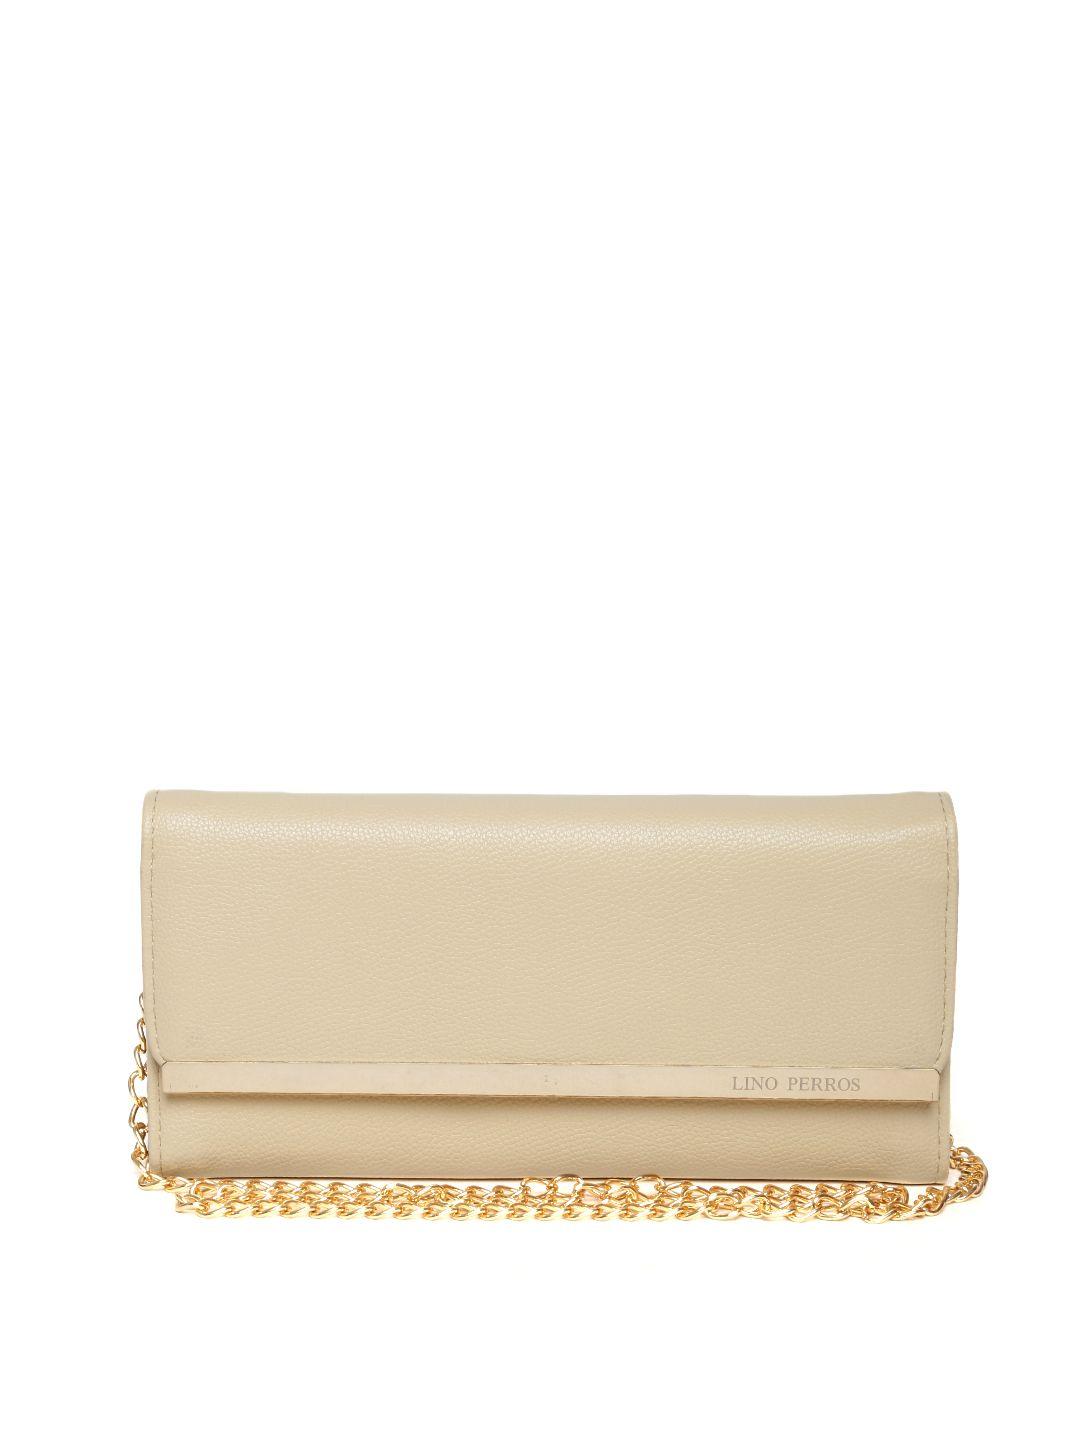 lino perros beige textured clutch with chain strap